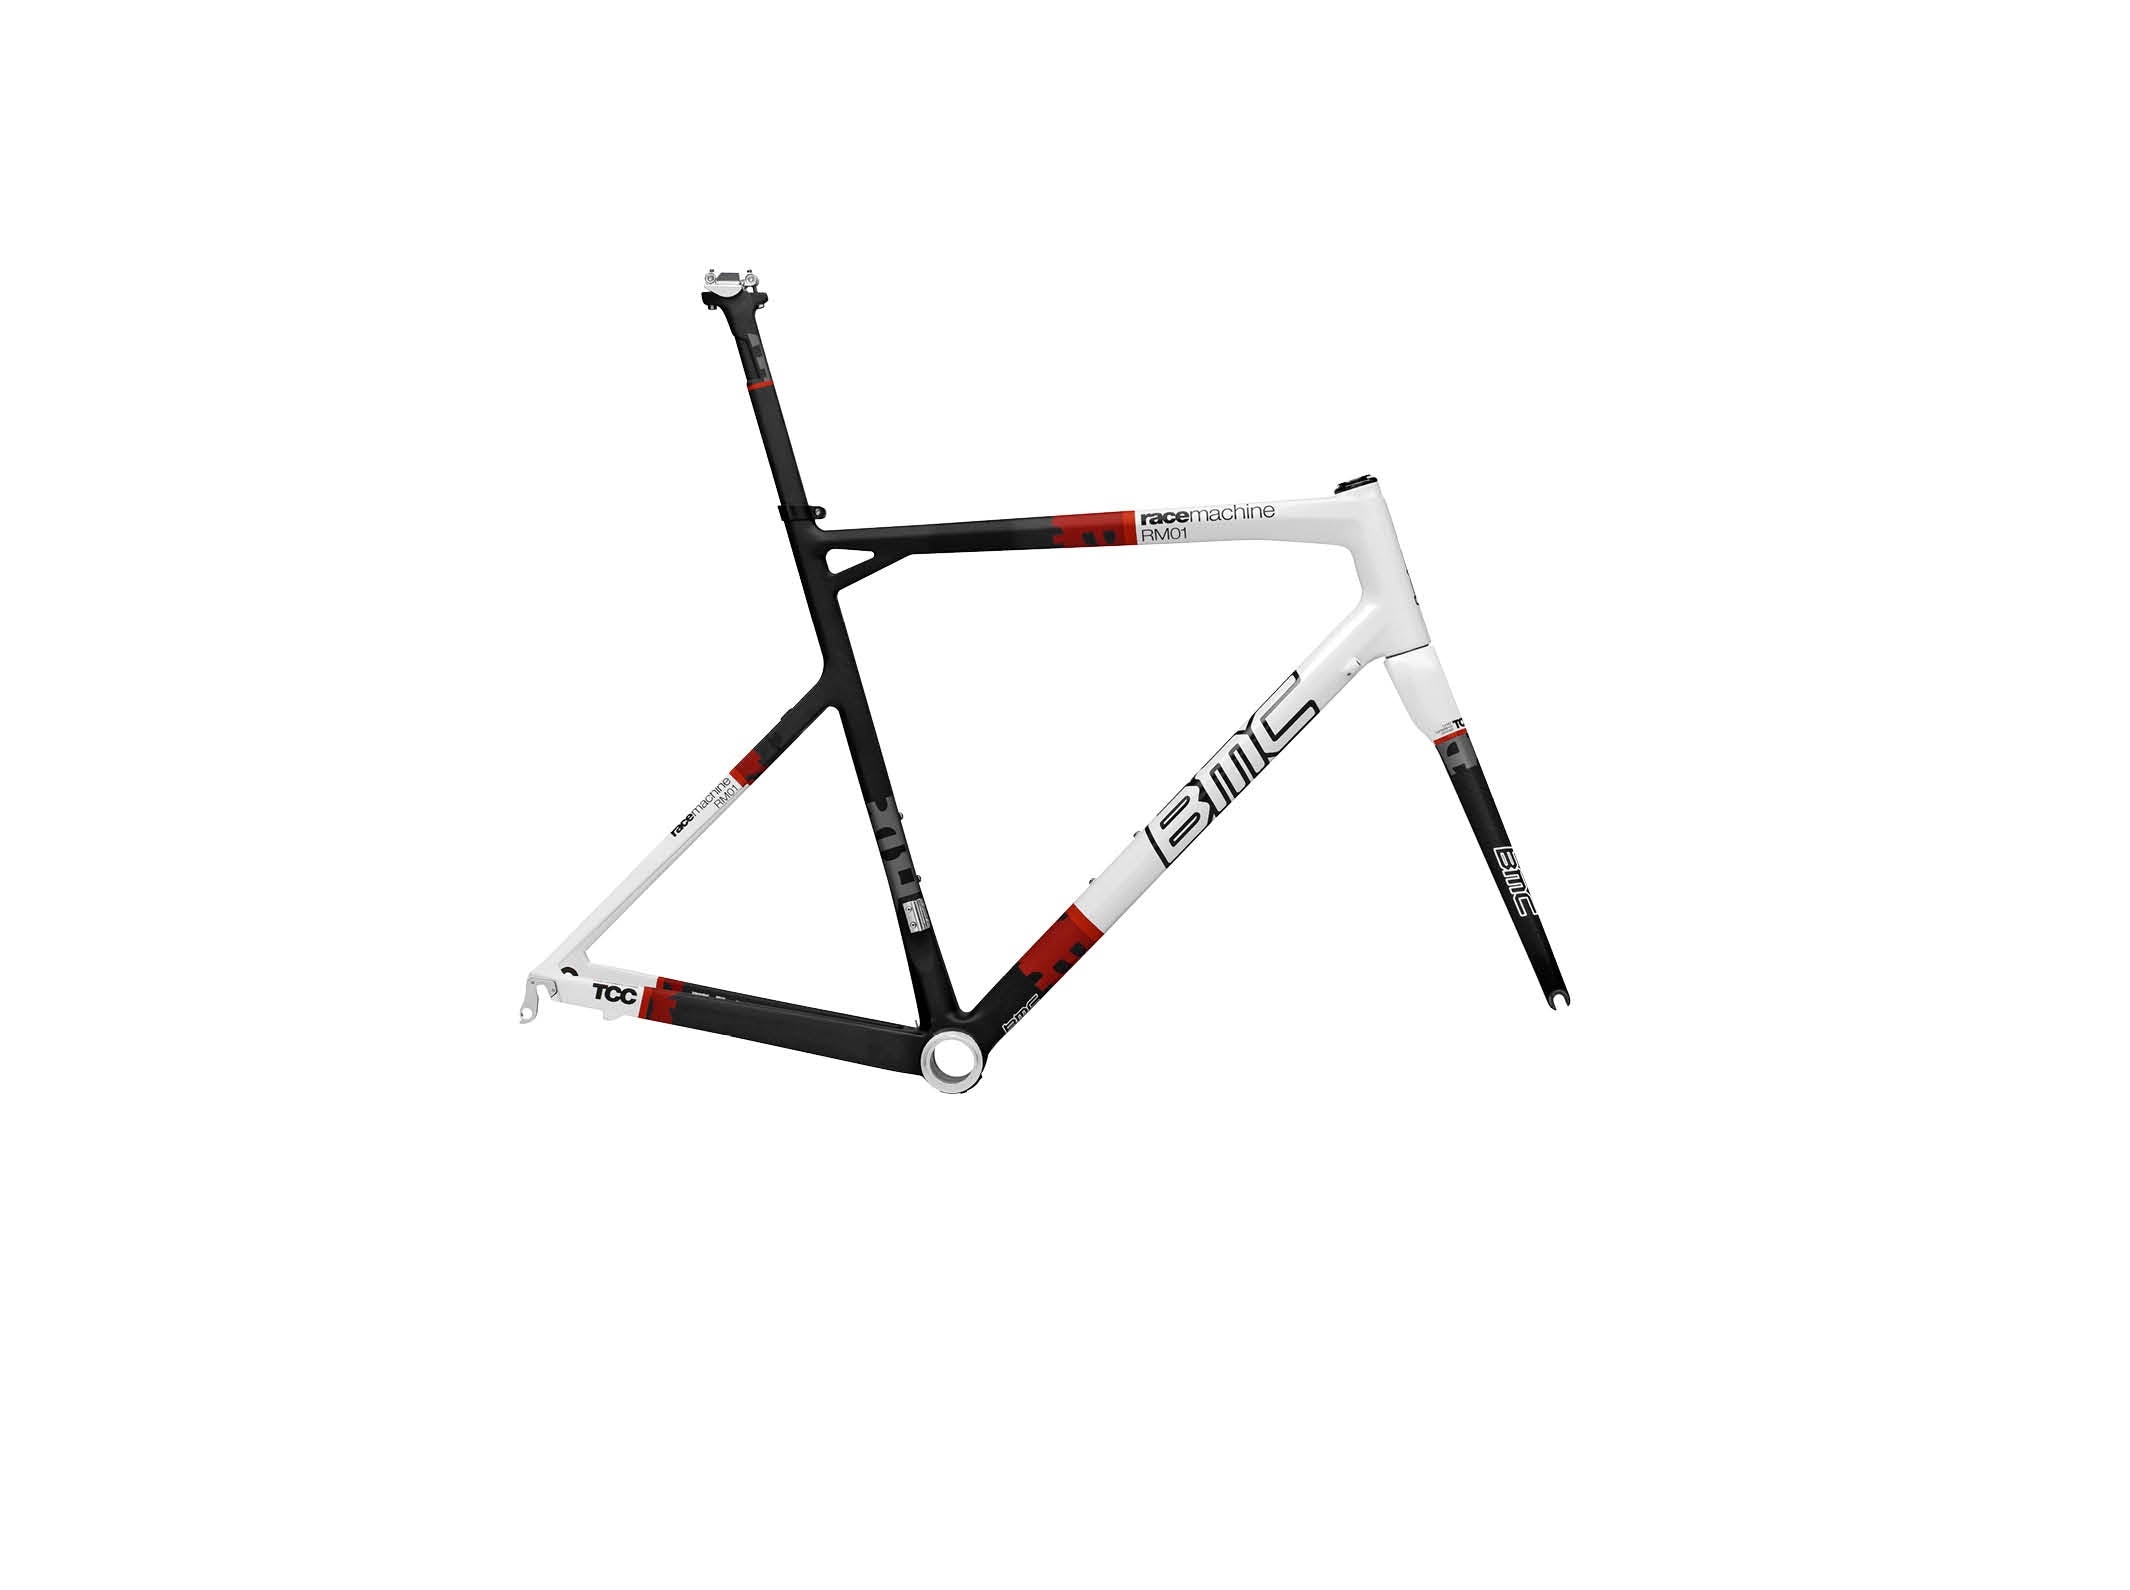 Racemachine RM01 FRS | BMC | frames | Road, Road | Racing